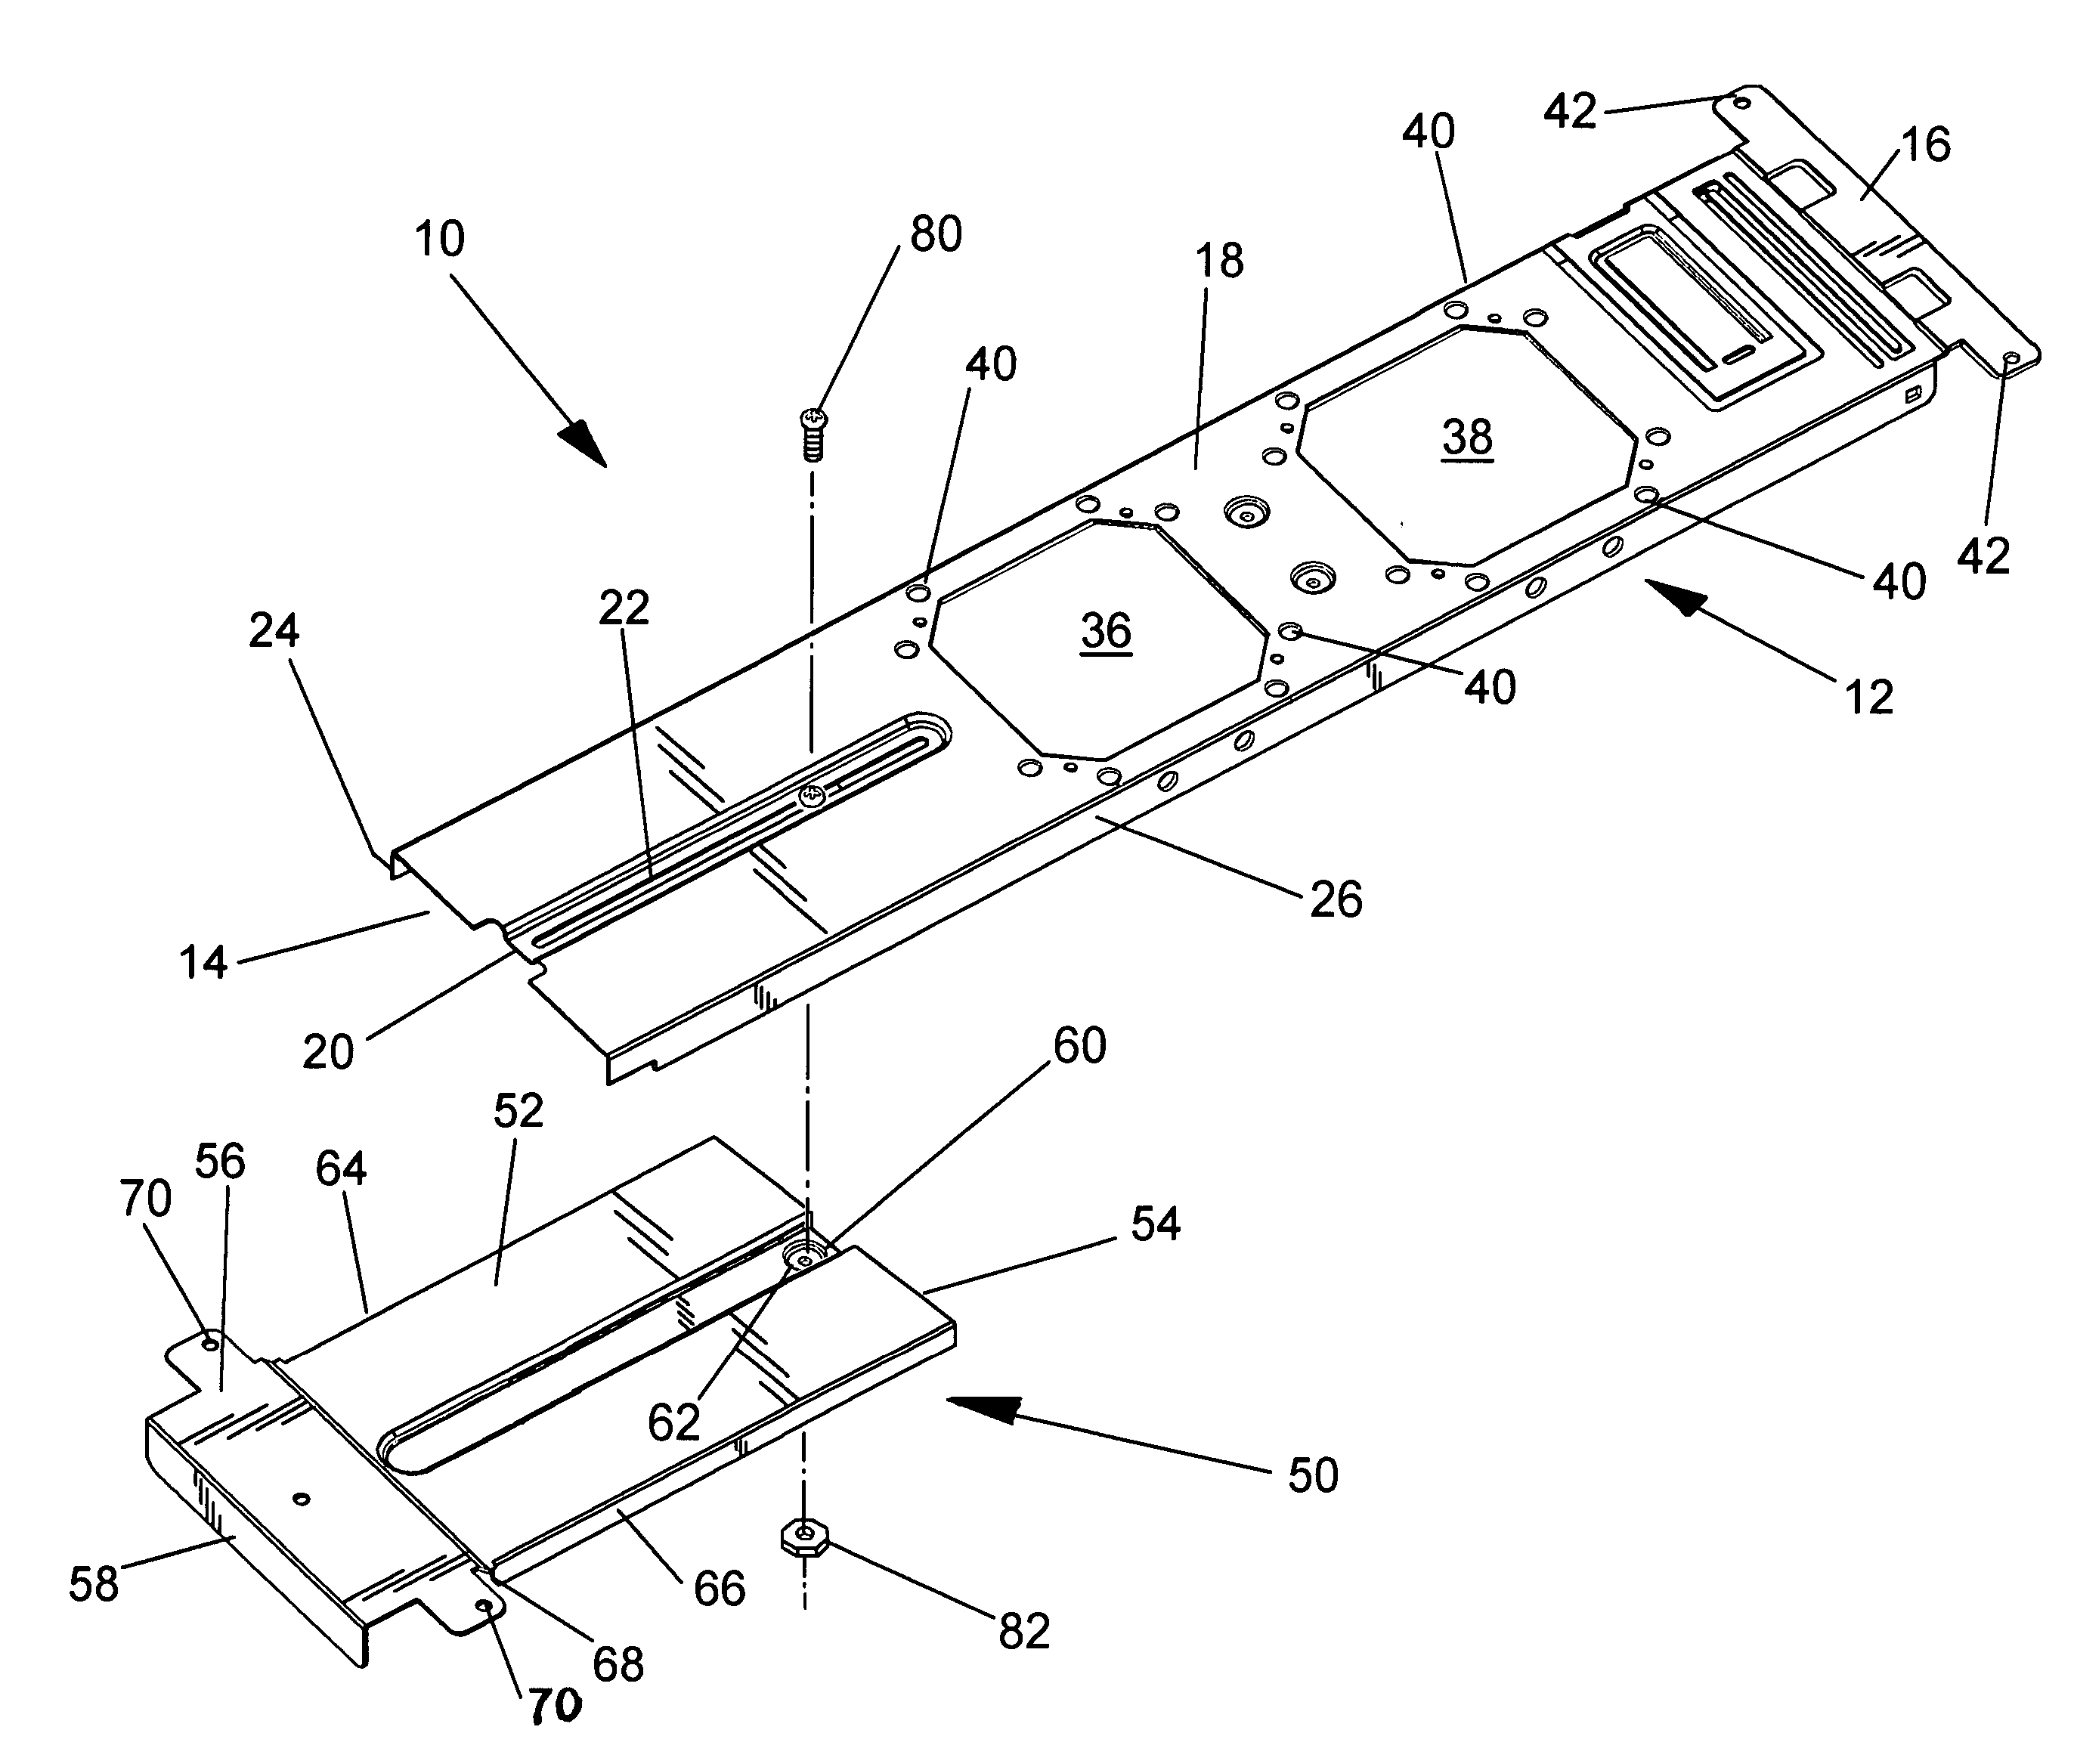 Adjustable mounting bracket assembly for mounting an electrical box